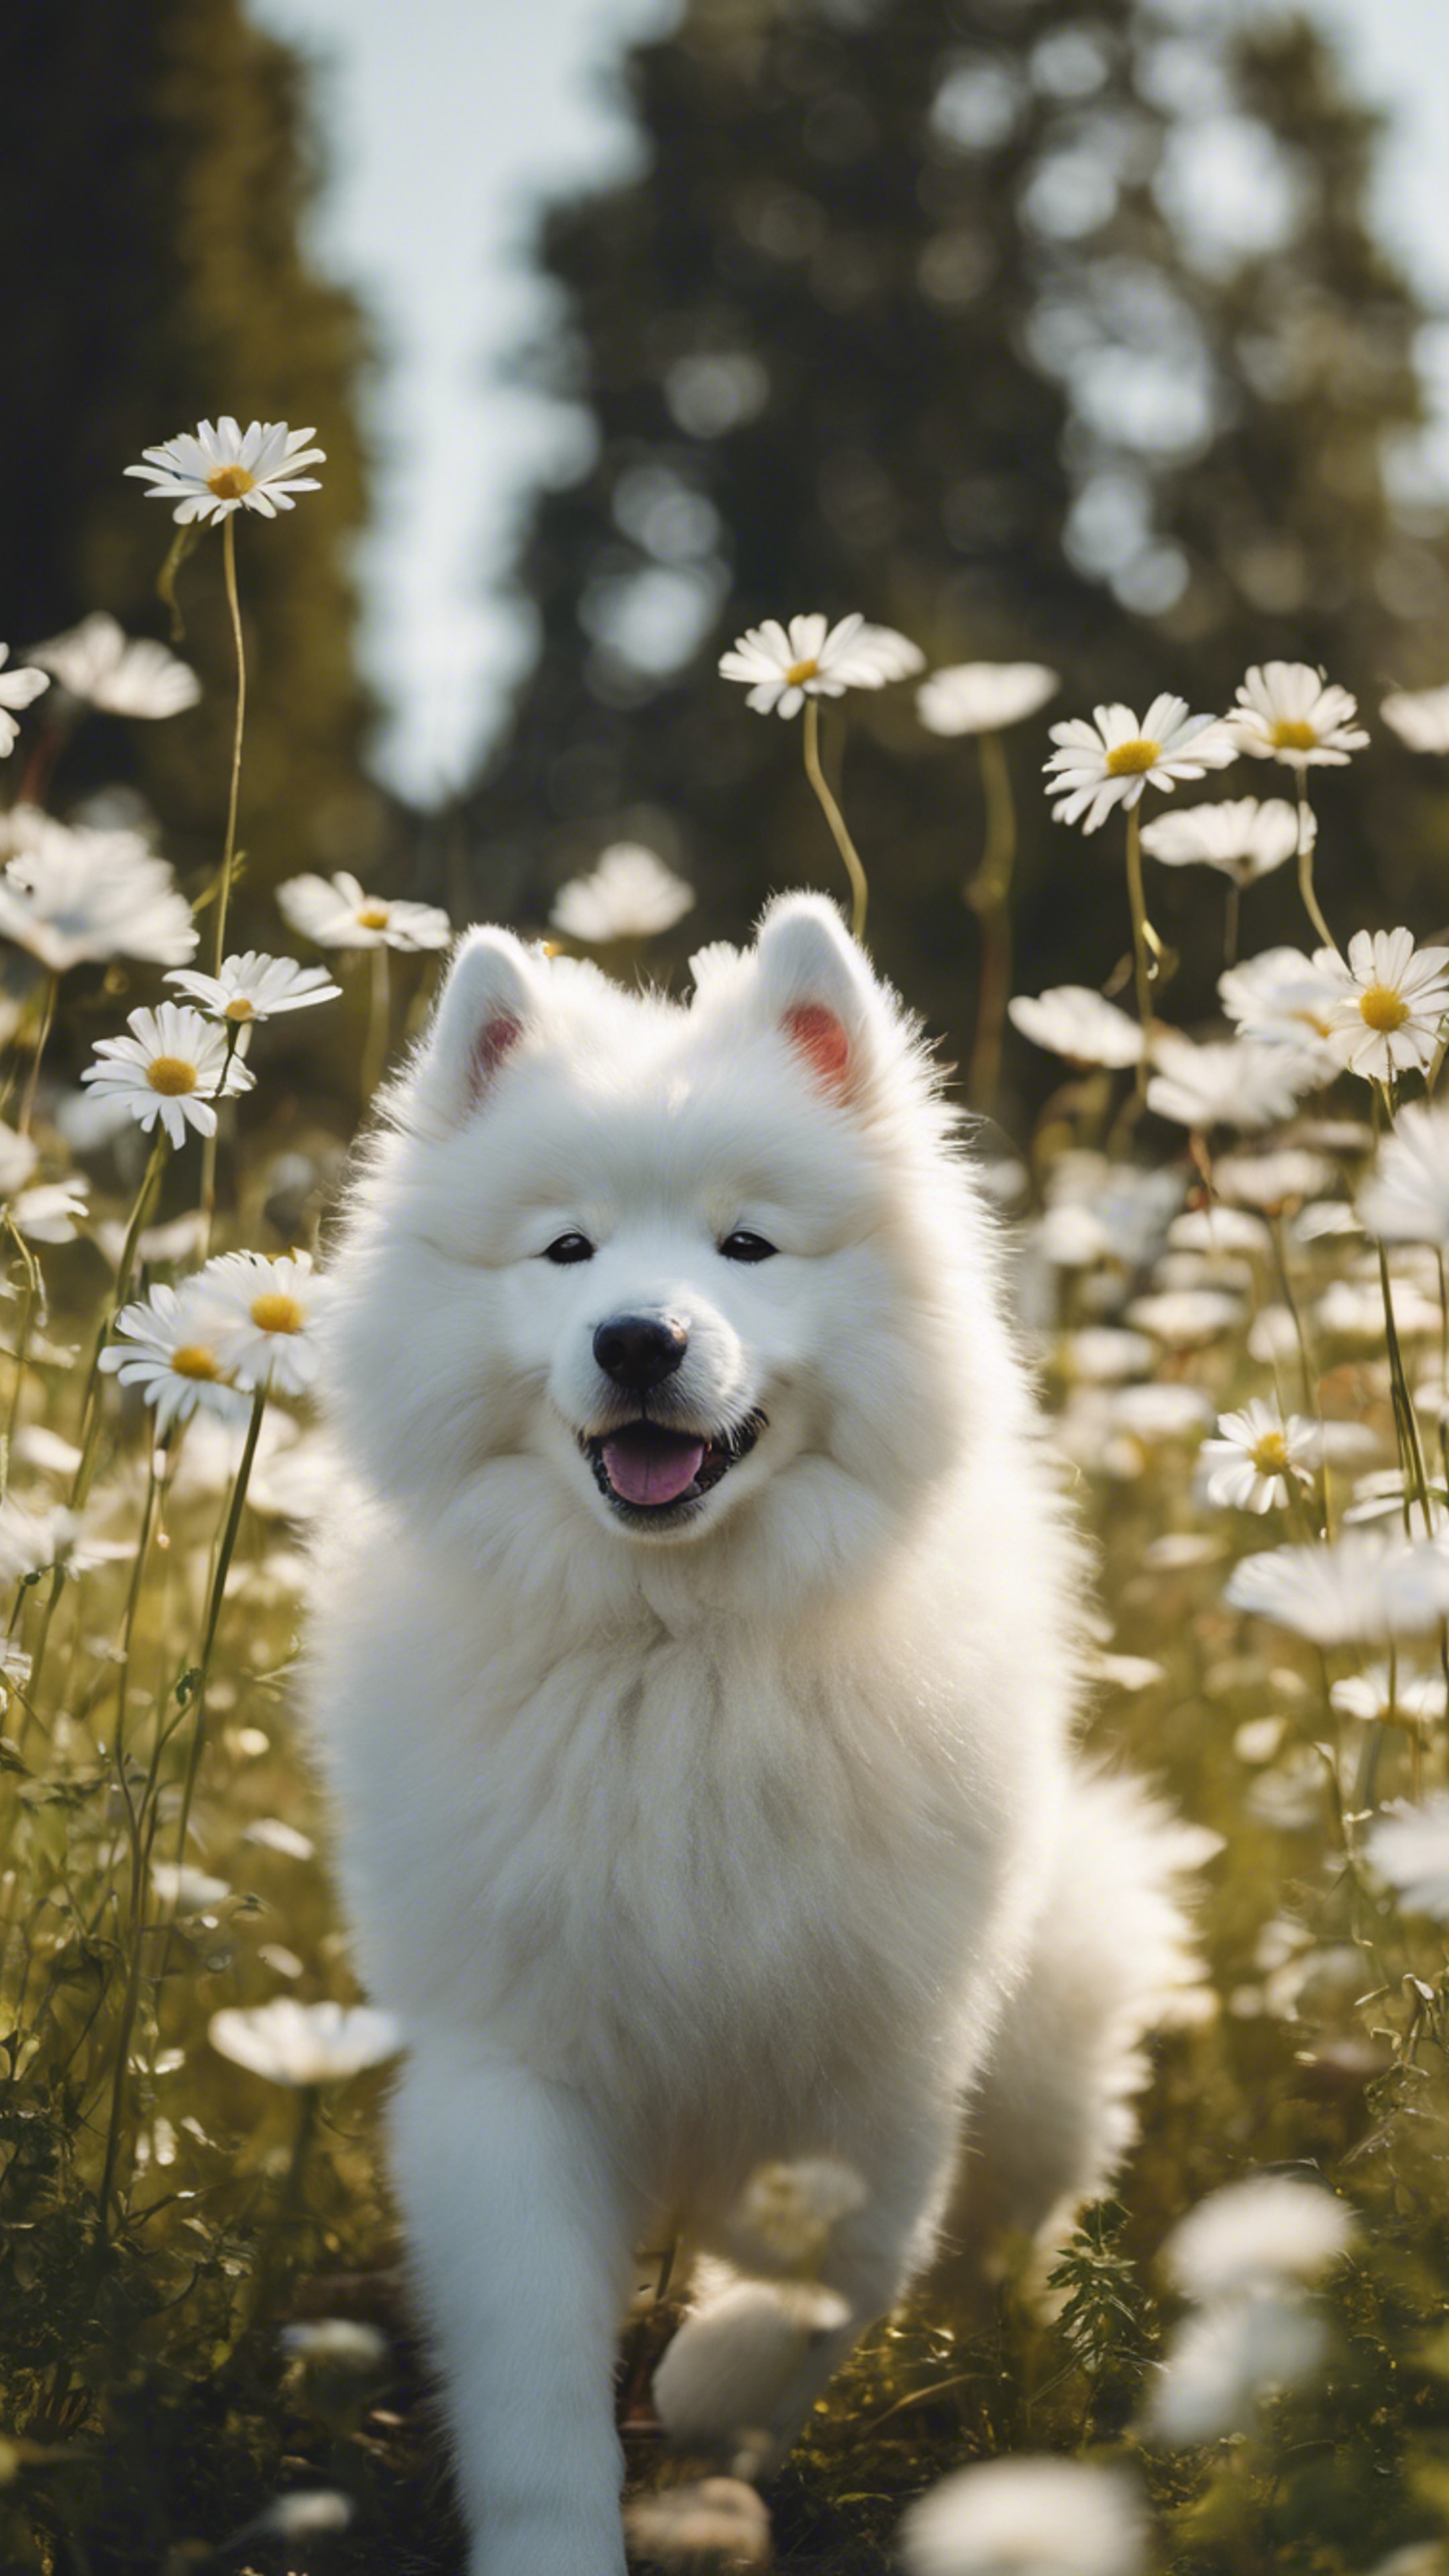 A fluffy Samoyed dog playing in a field dappled with white daises.壁紙[847d907dea674bcc84ac]